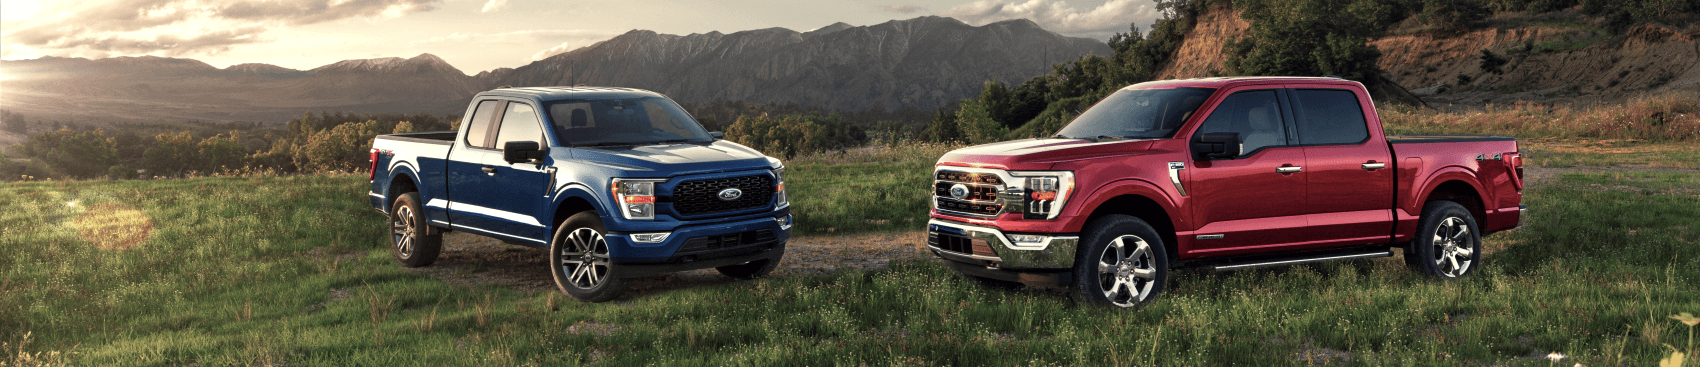 Test Drive The 2021 Ford F-150